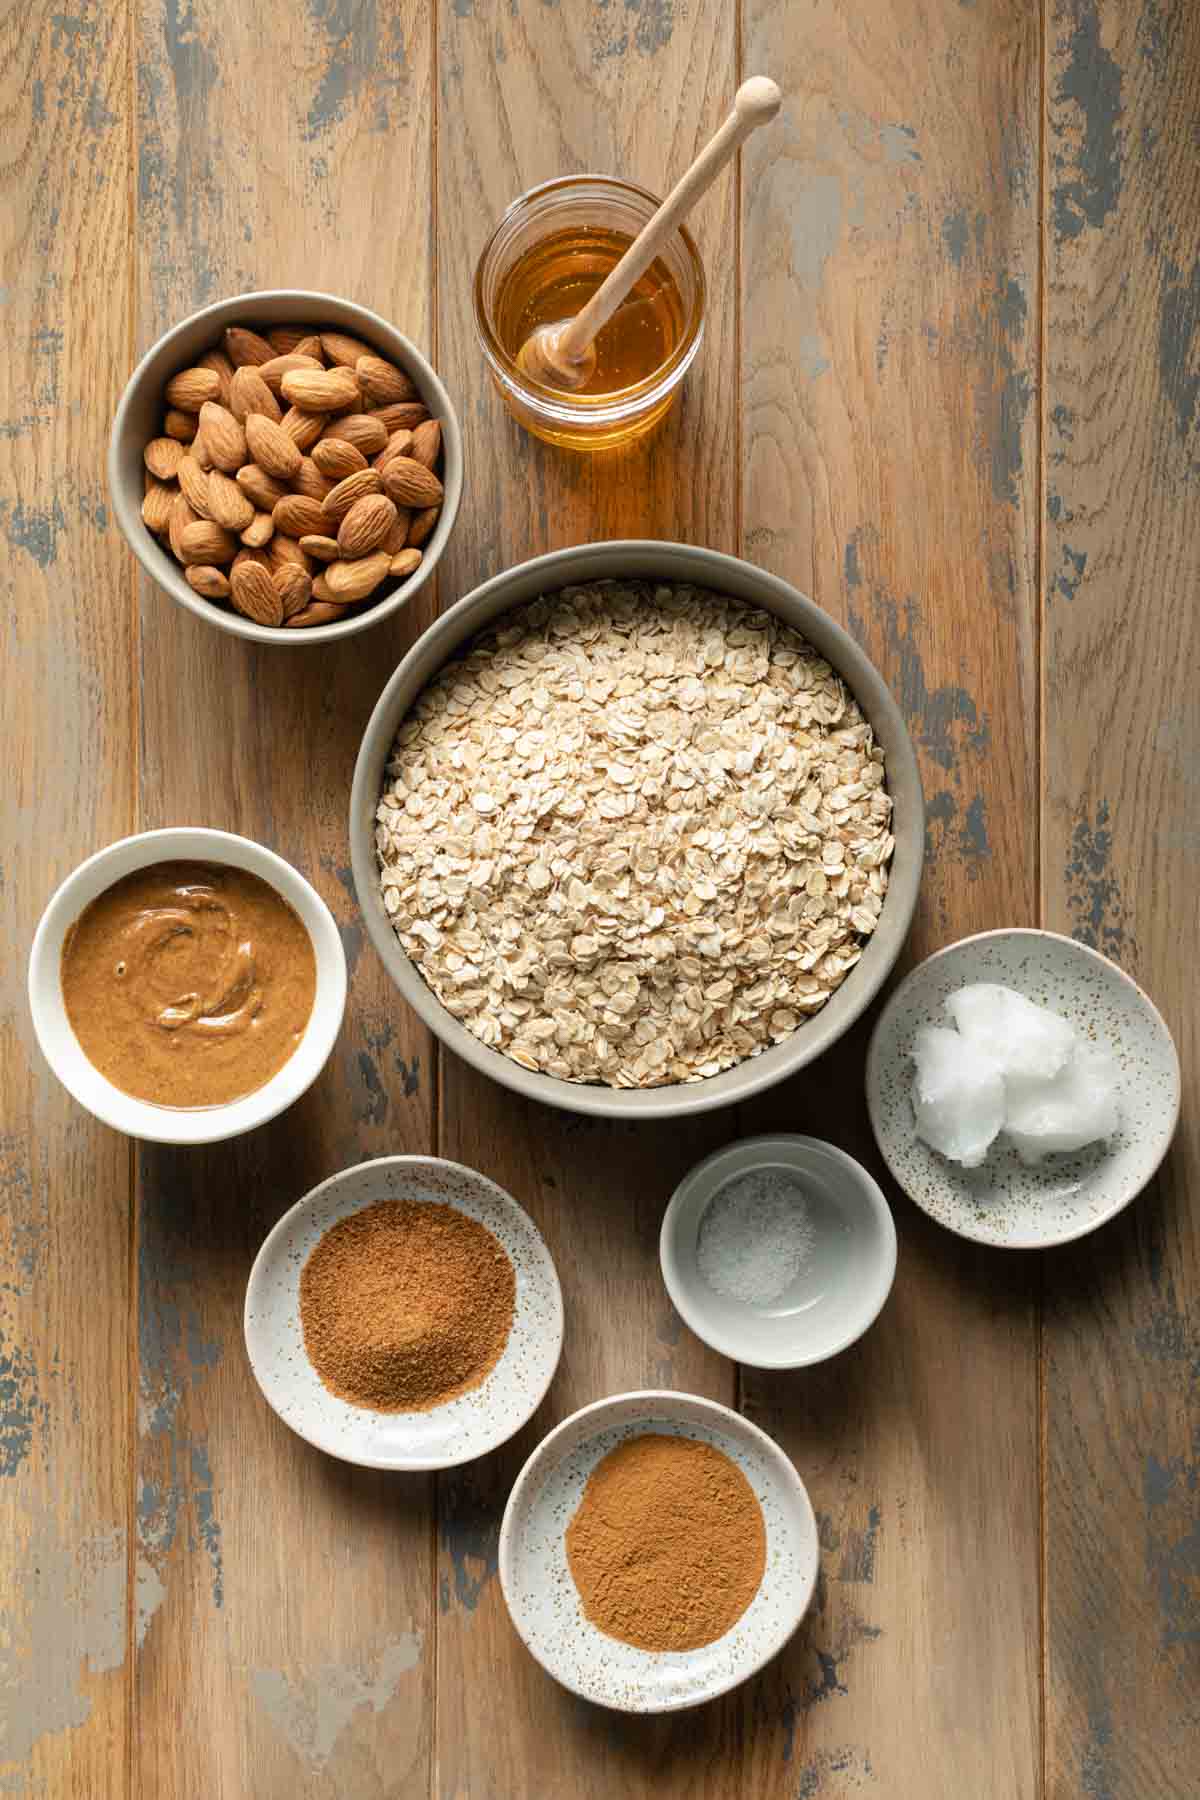 Ingredients to make honey almond granola arranged individually on a wooden table surface.